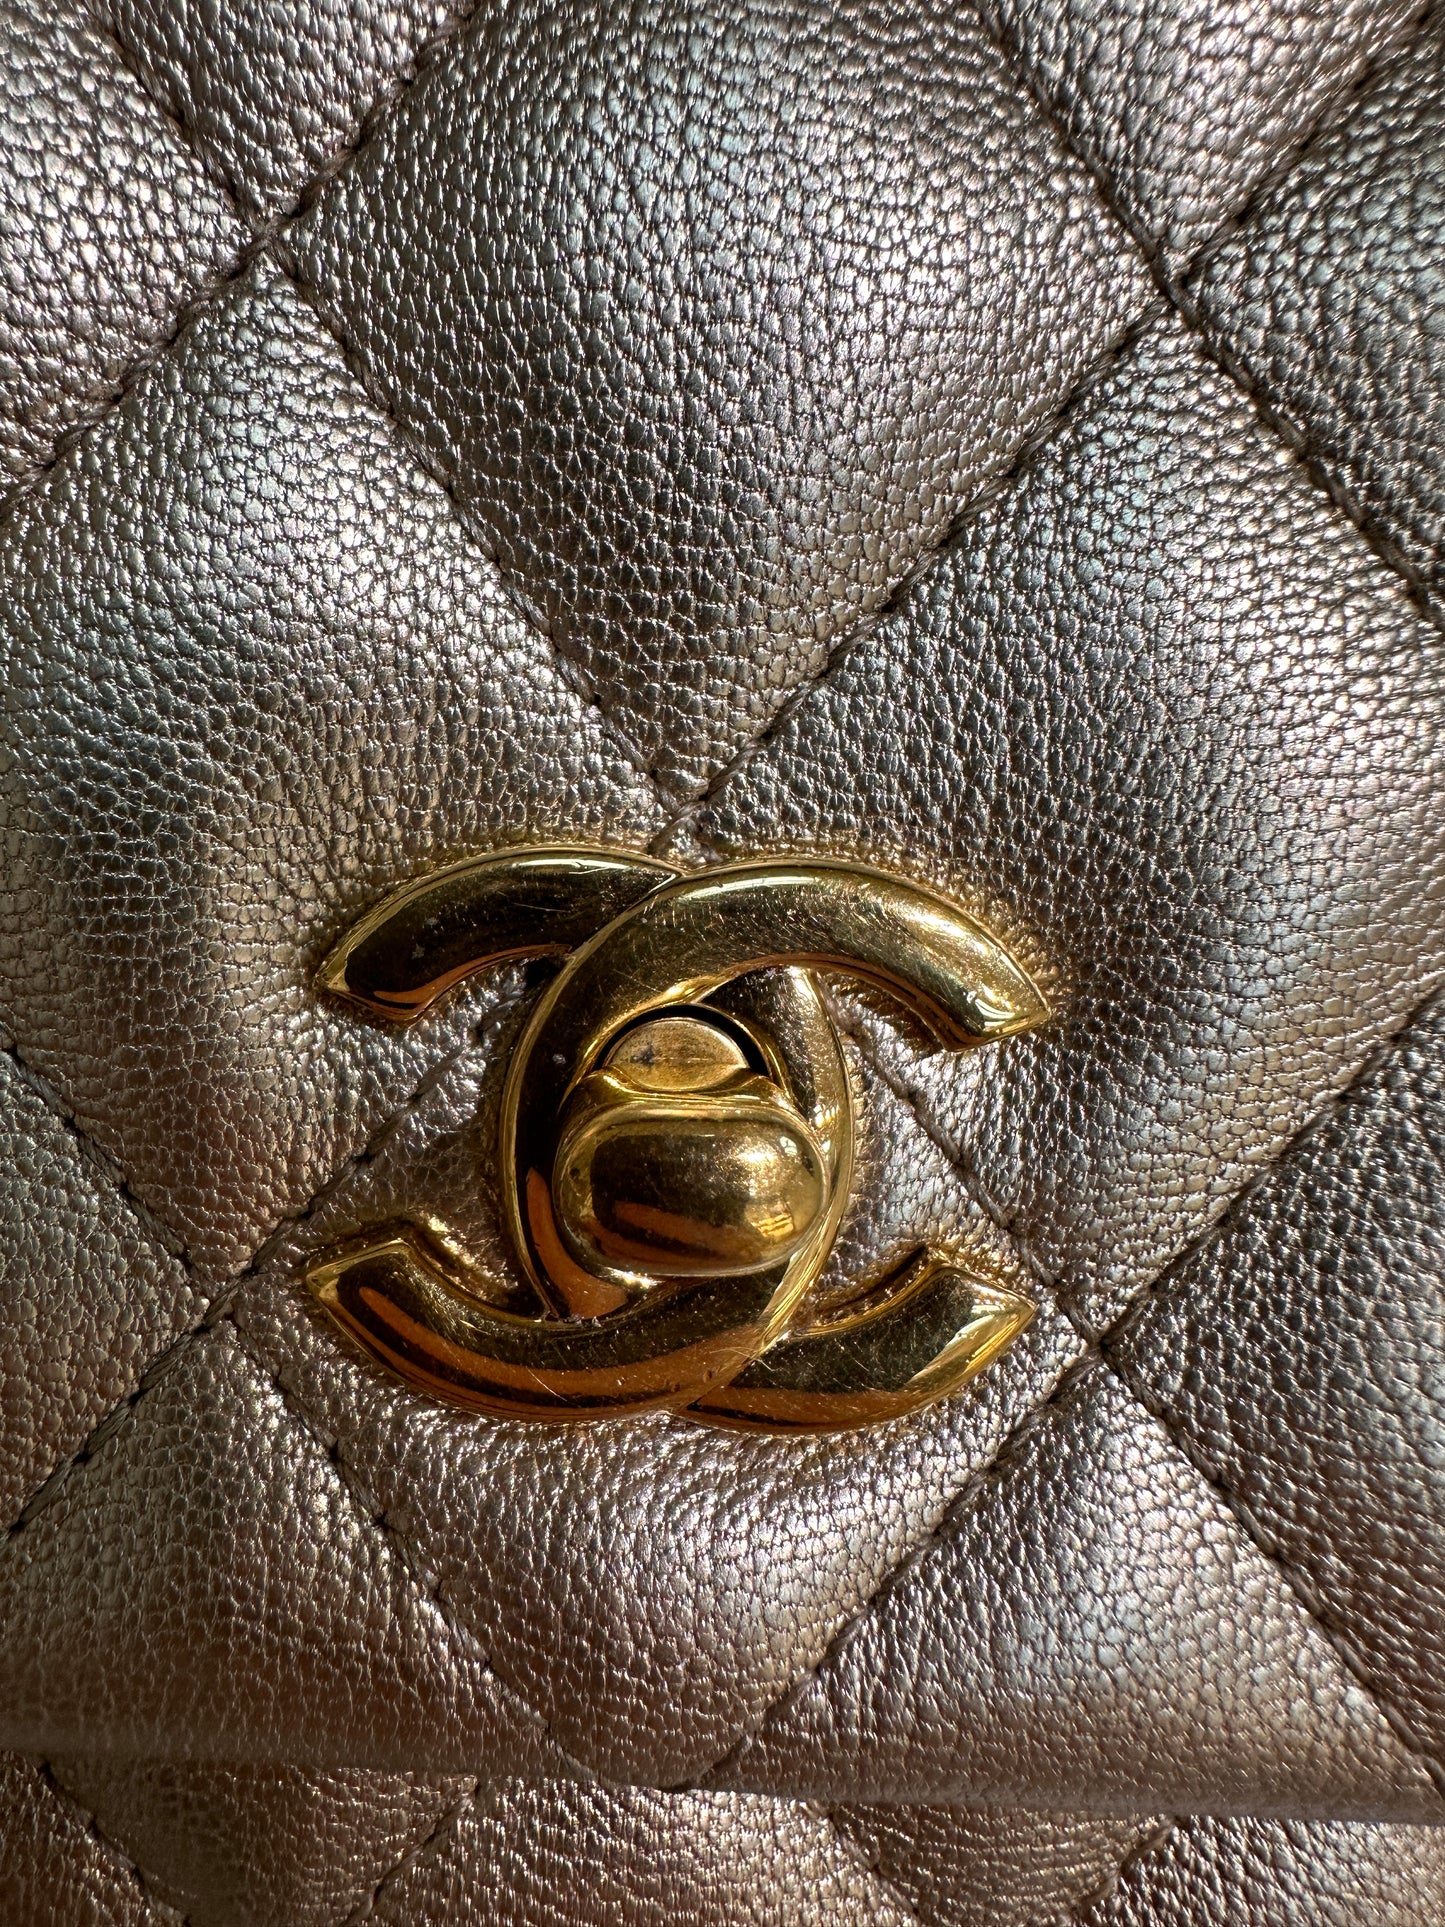 Chanel Gold Quilted Calfskin Single Flap Clutch